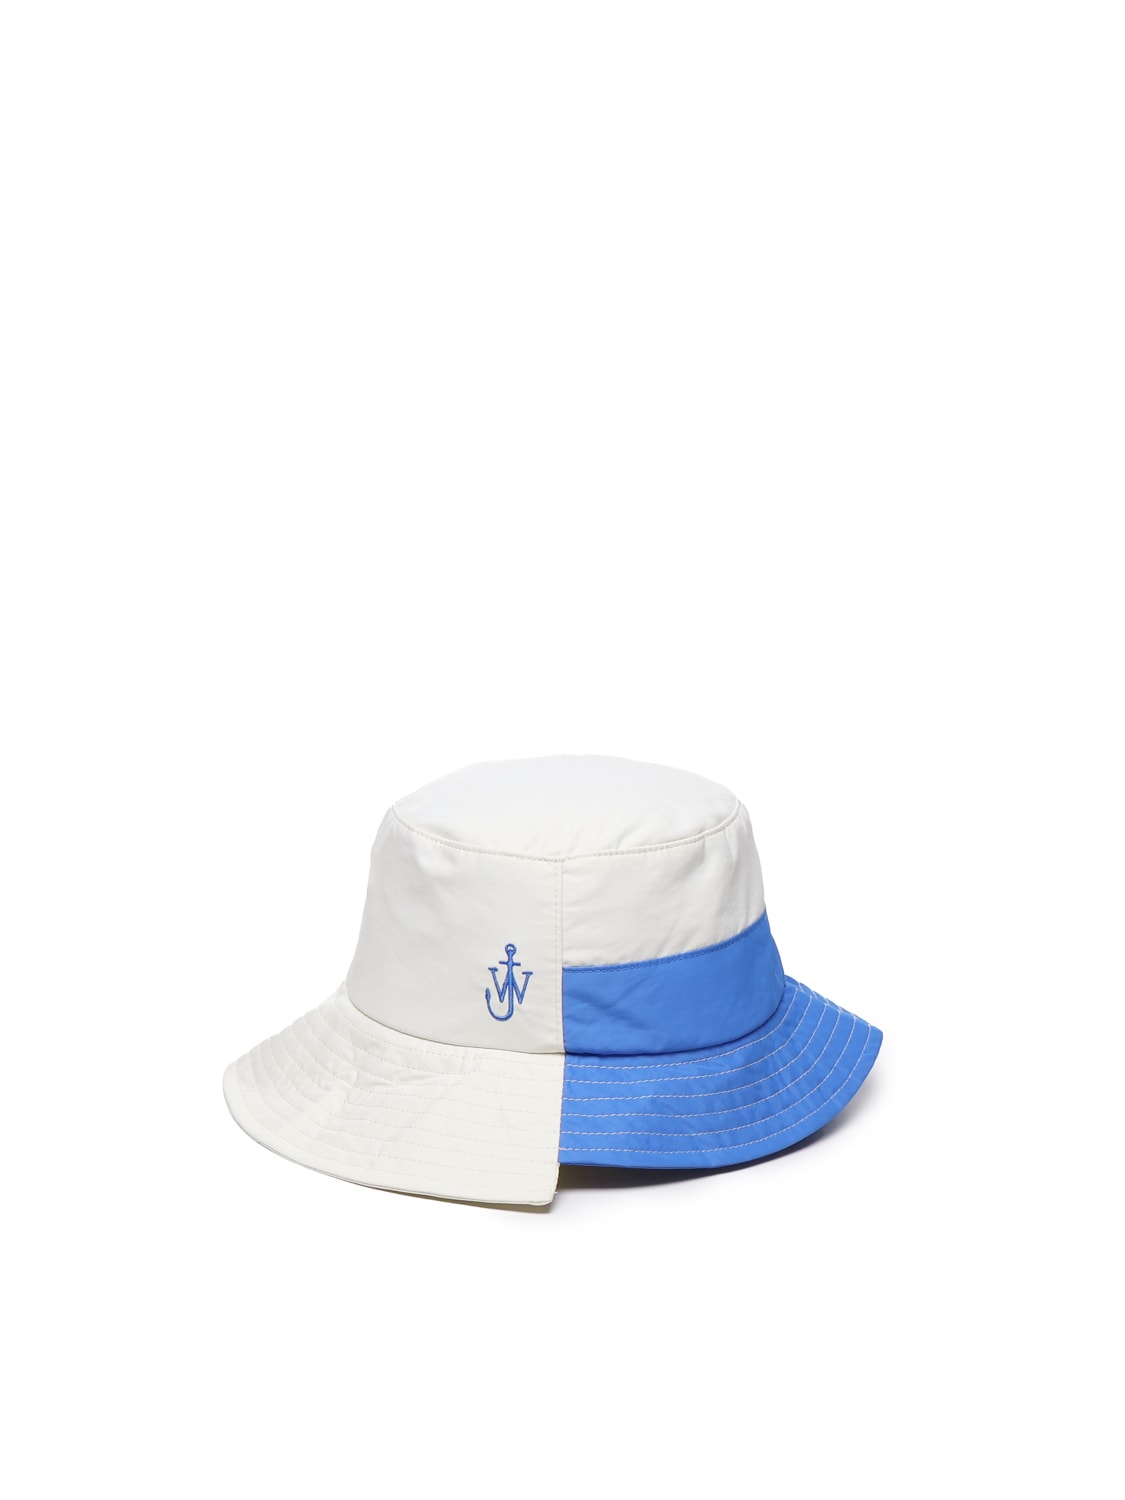 Jw Anderson Duo Two-tone Bucket Hat In White/blue